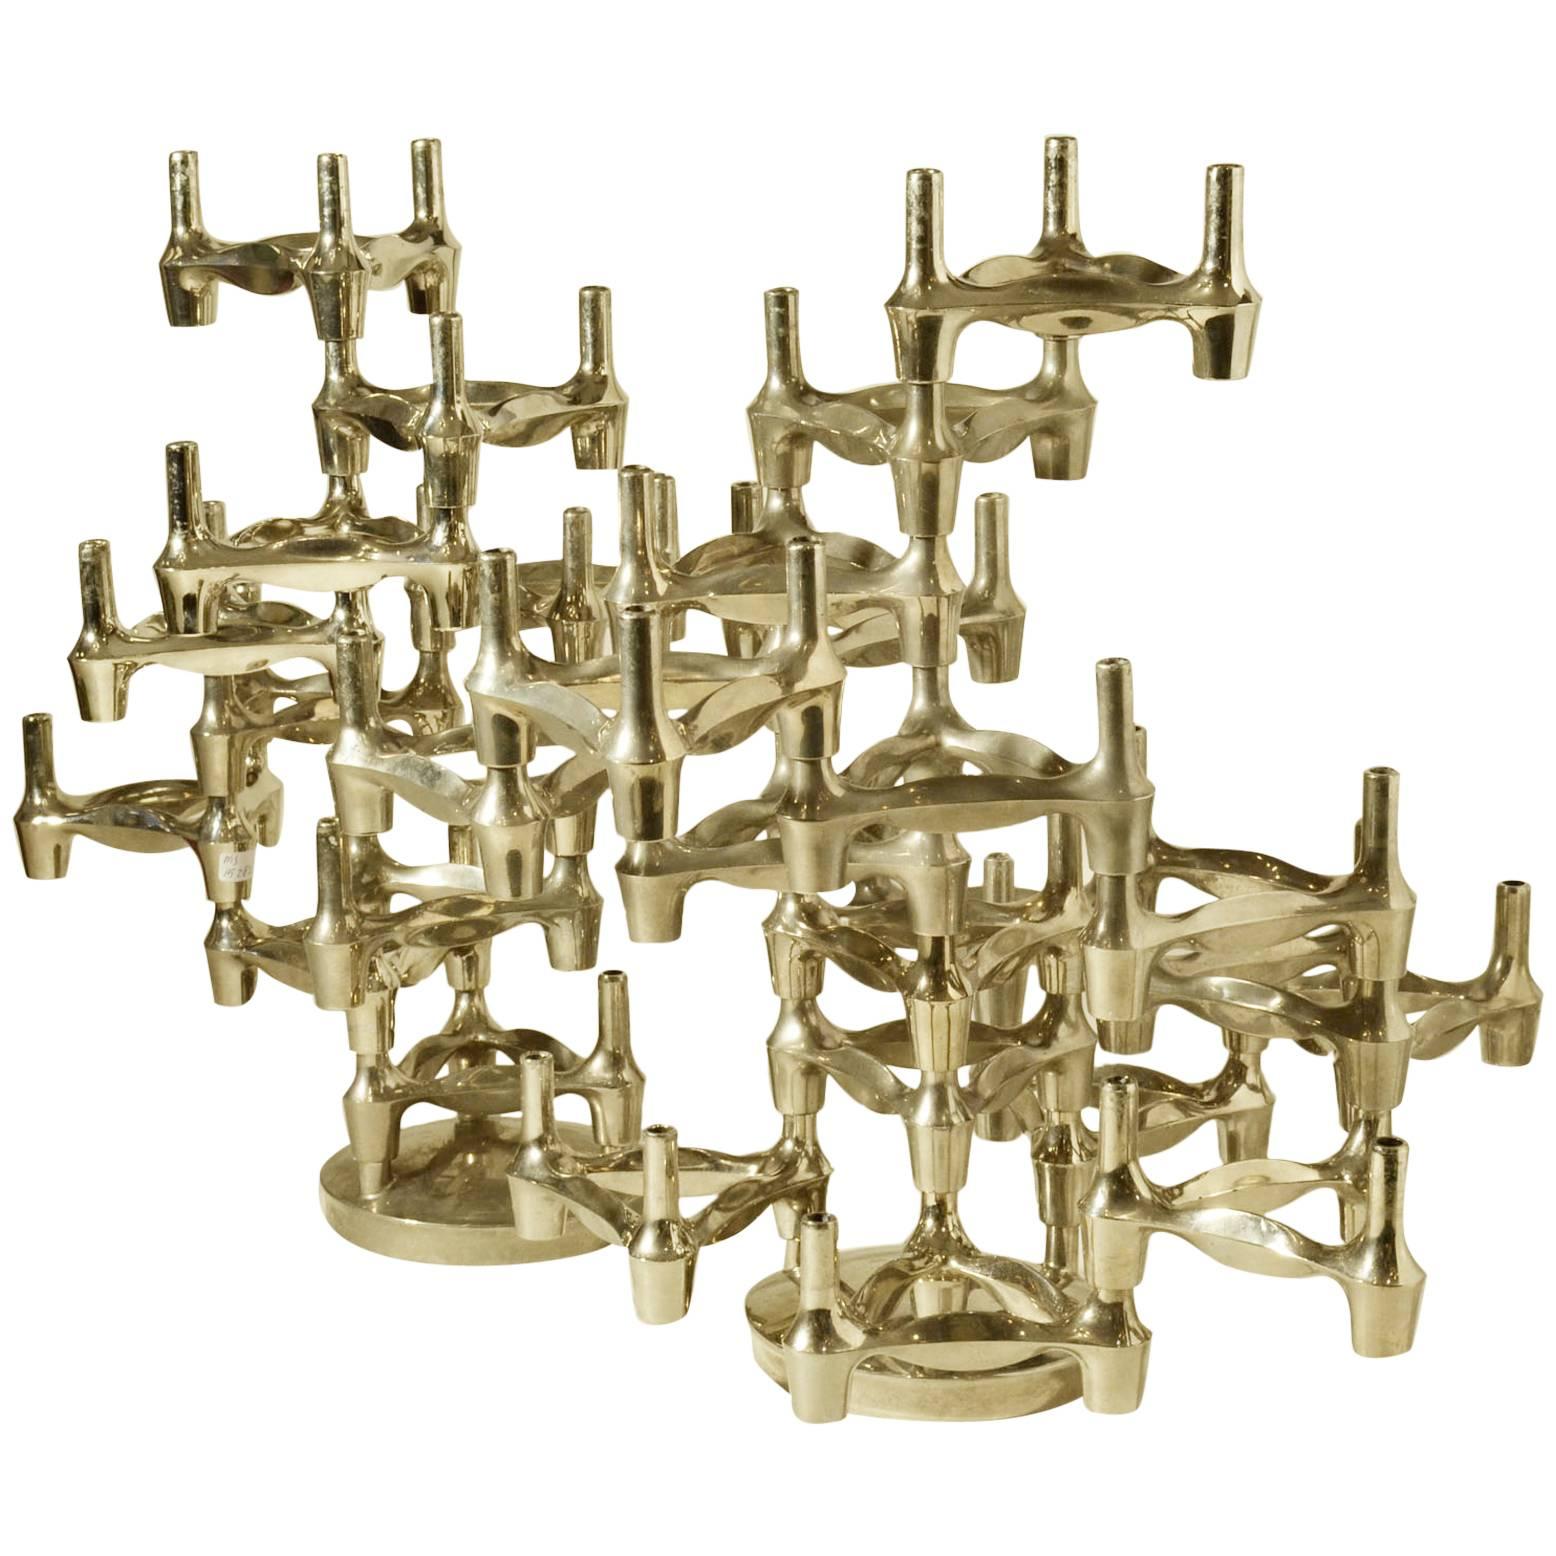 Nagel Stackable Candle Holders